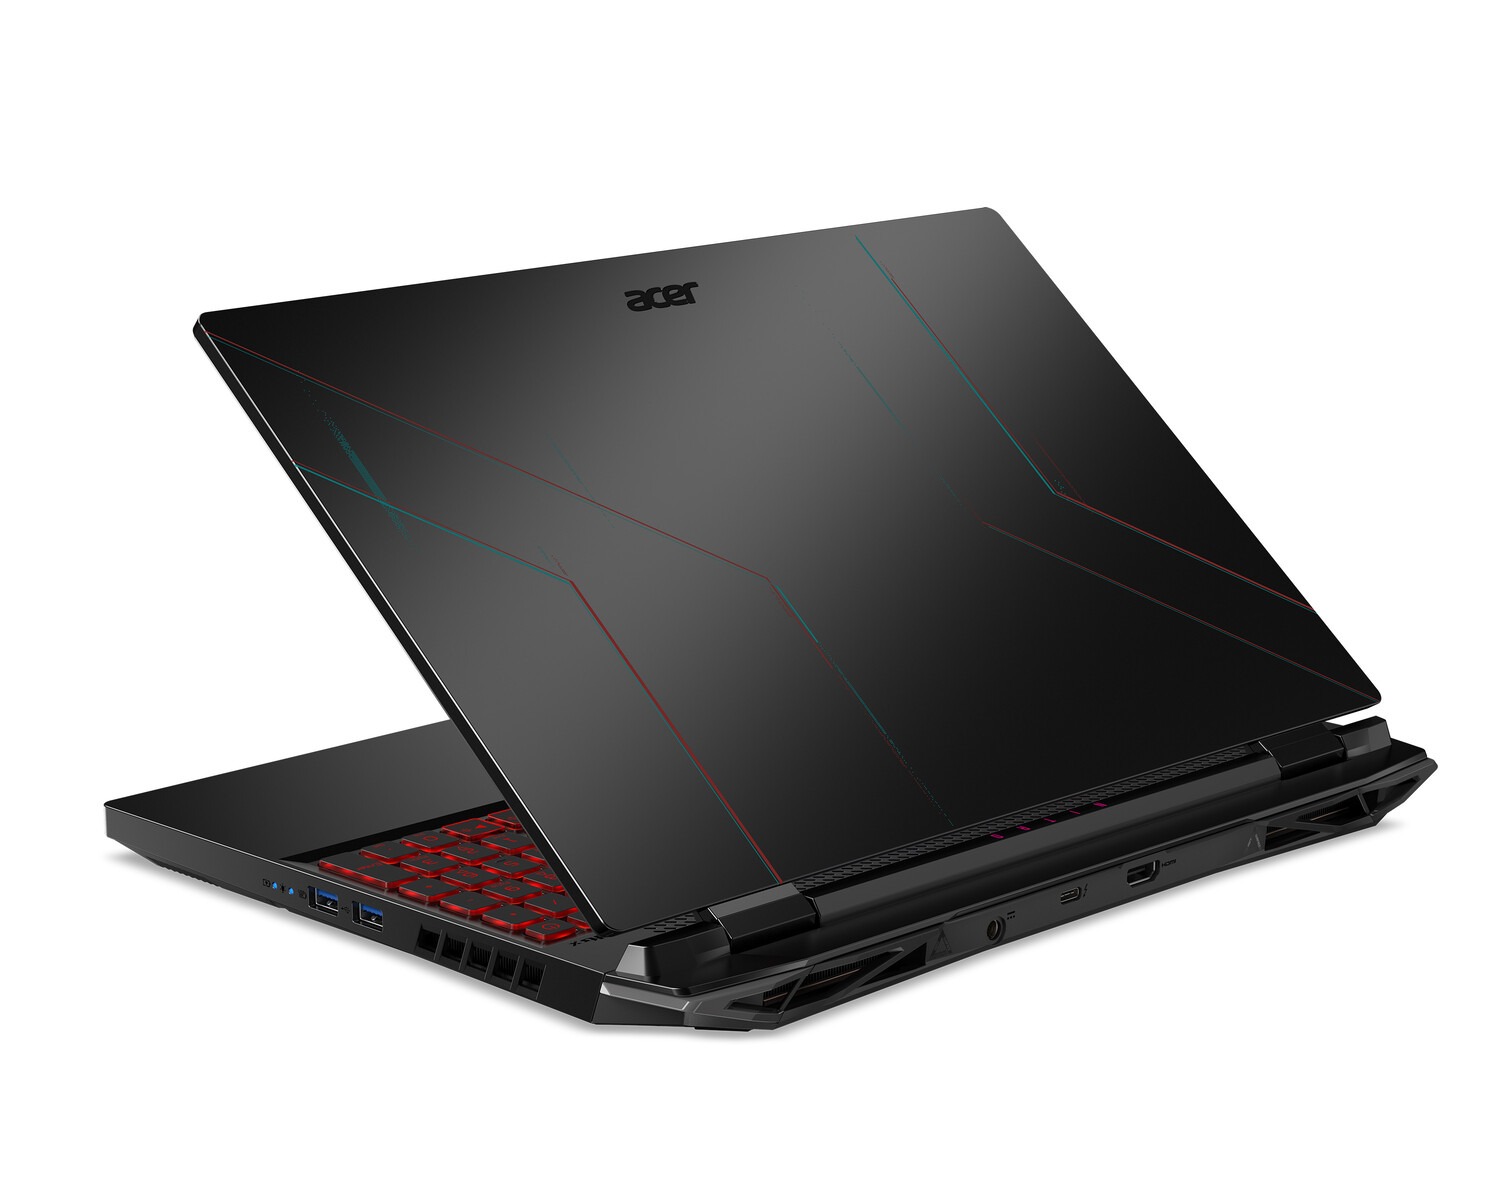 Today, we reviewed Acer Nitro 5 2022, a great budget gaming laptop that can provide most users with what they need in terms of productivity and gaming.